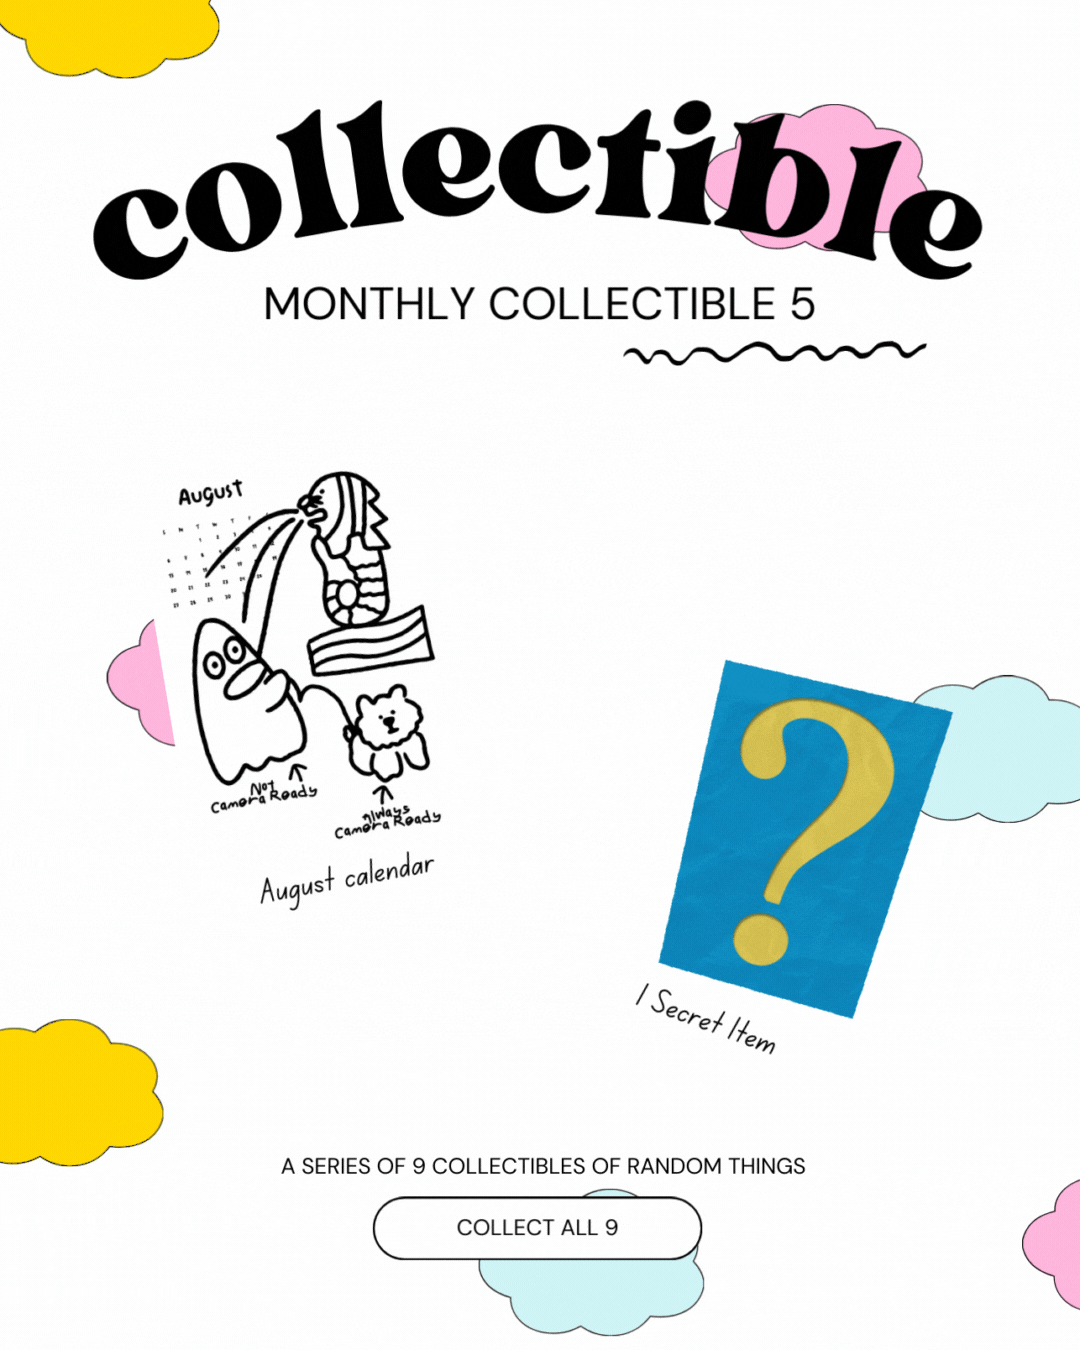 Monthly Collectible 5